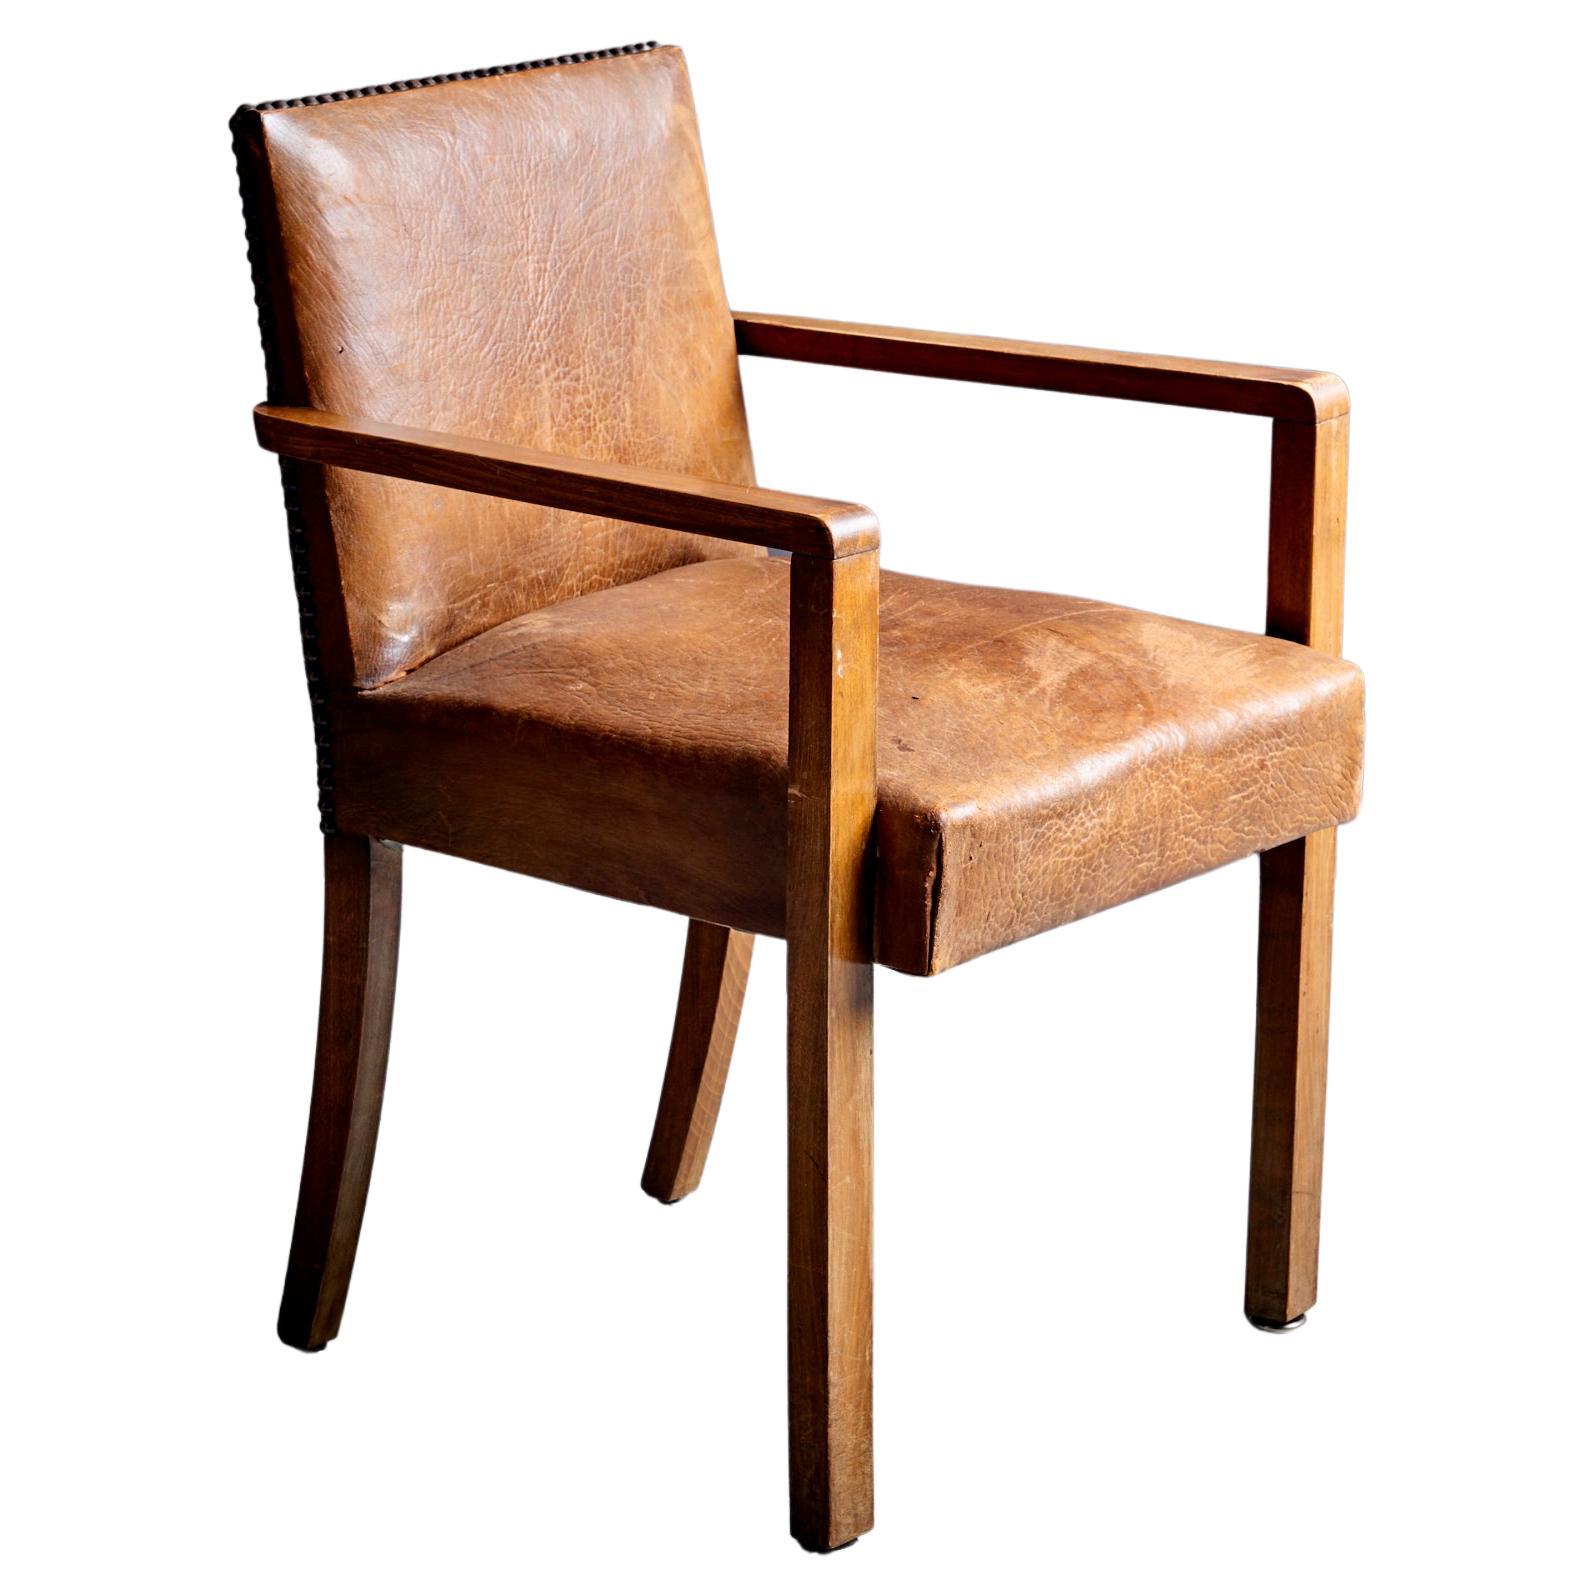 Art Deco Arm Chair attributed to Francis Jourdain 1940s brown leather